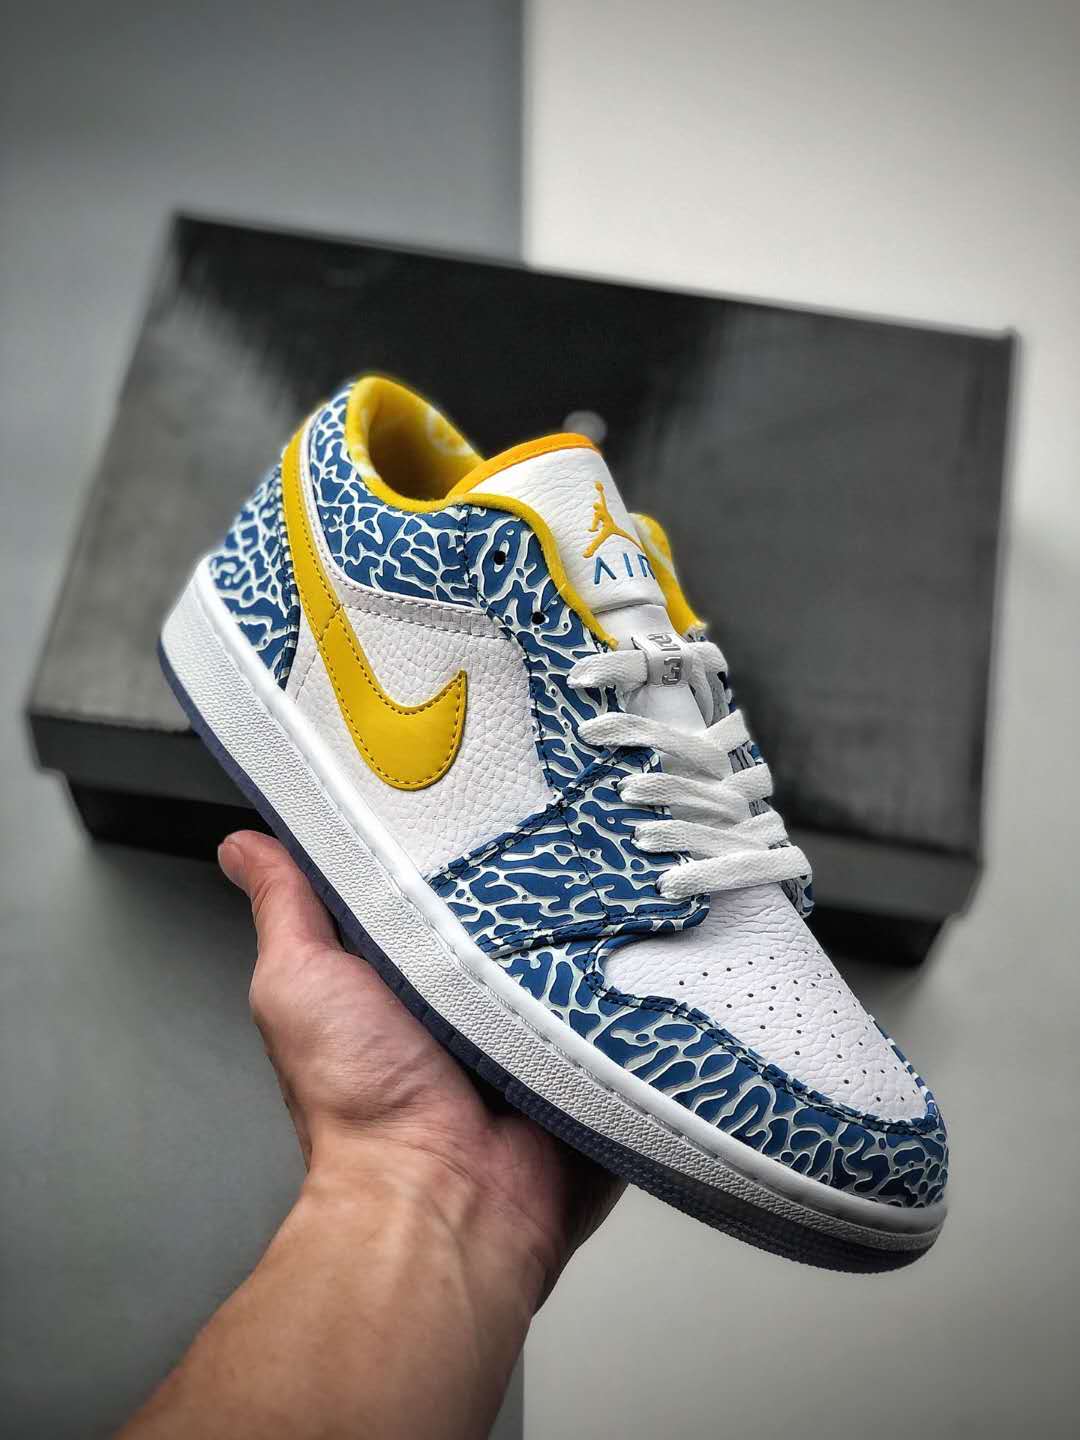 Air Jordan 1 Retro Low 'West Coast' 309192-172 - Iconic Style for Sneaker Enthusiasts